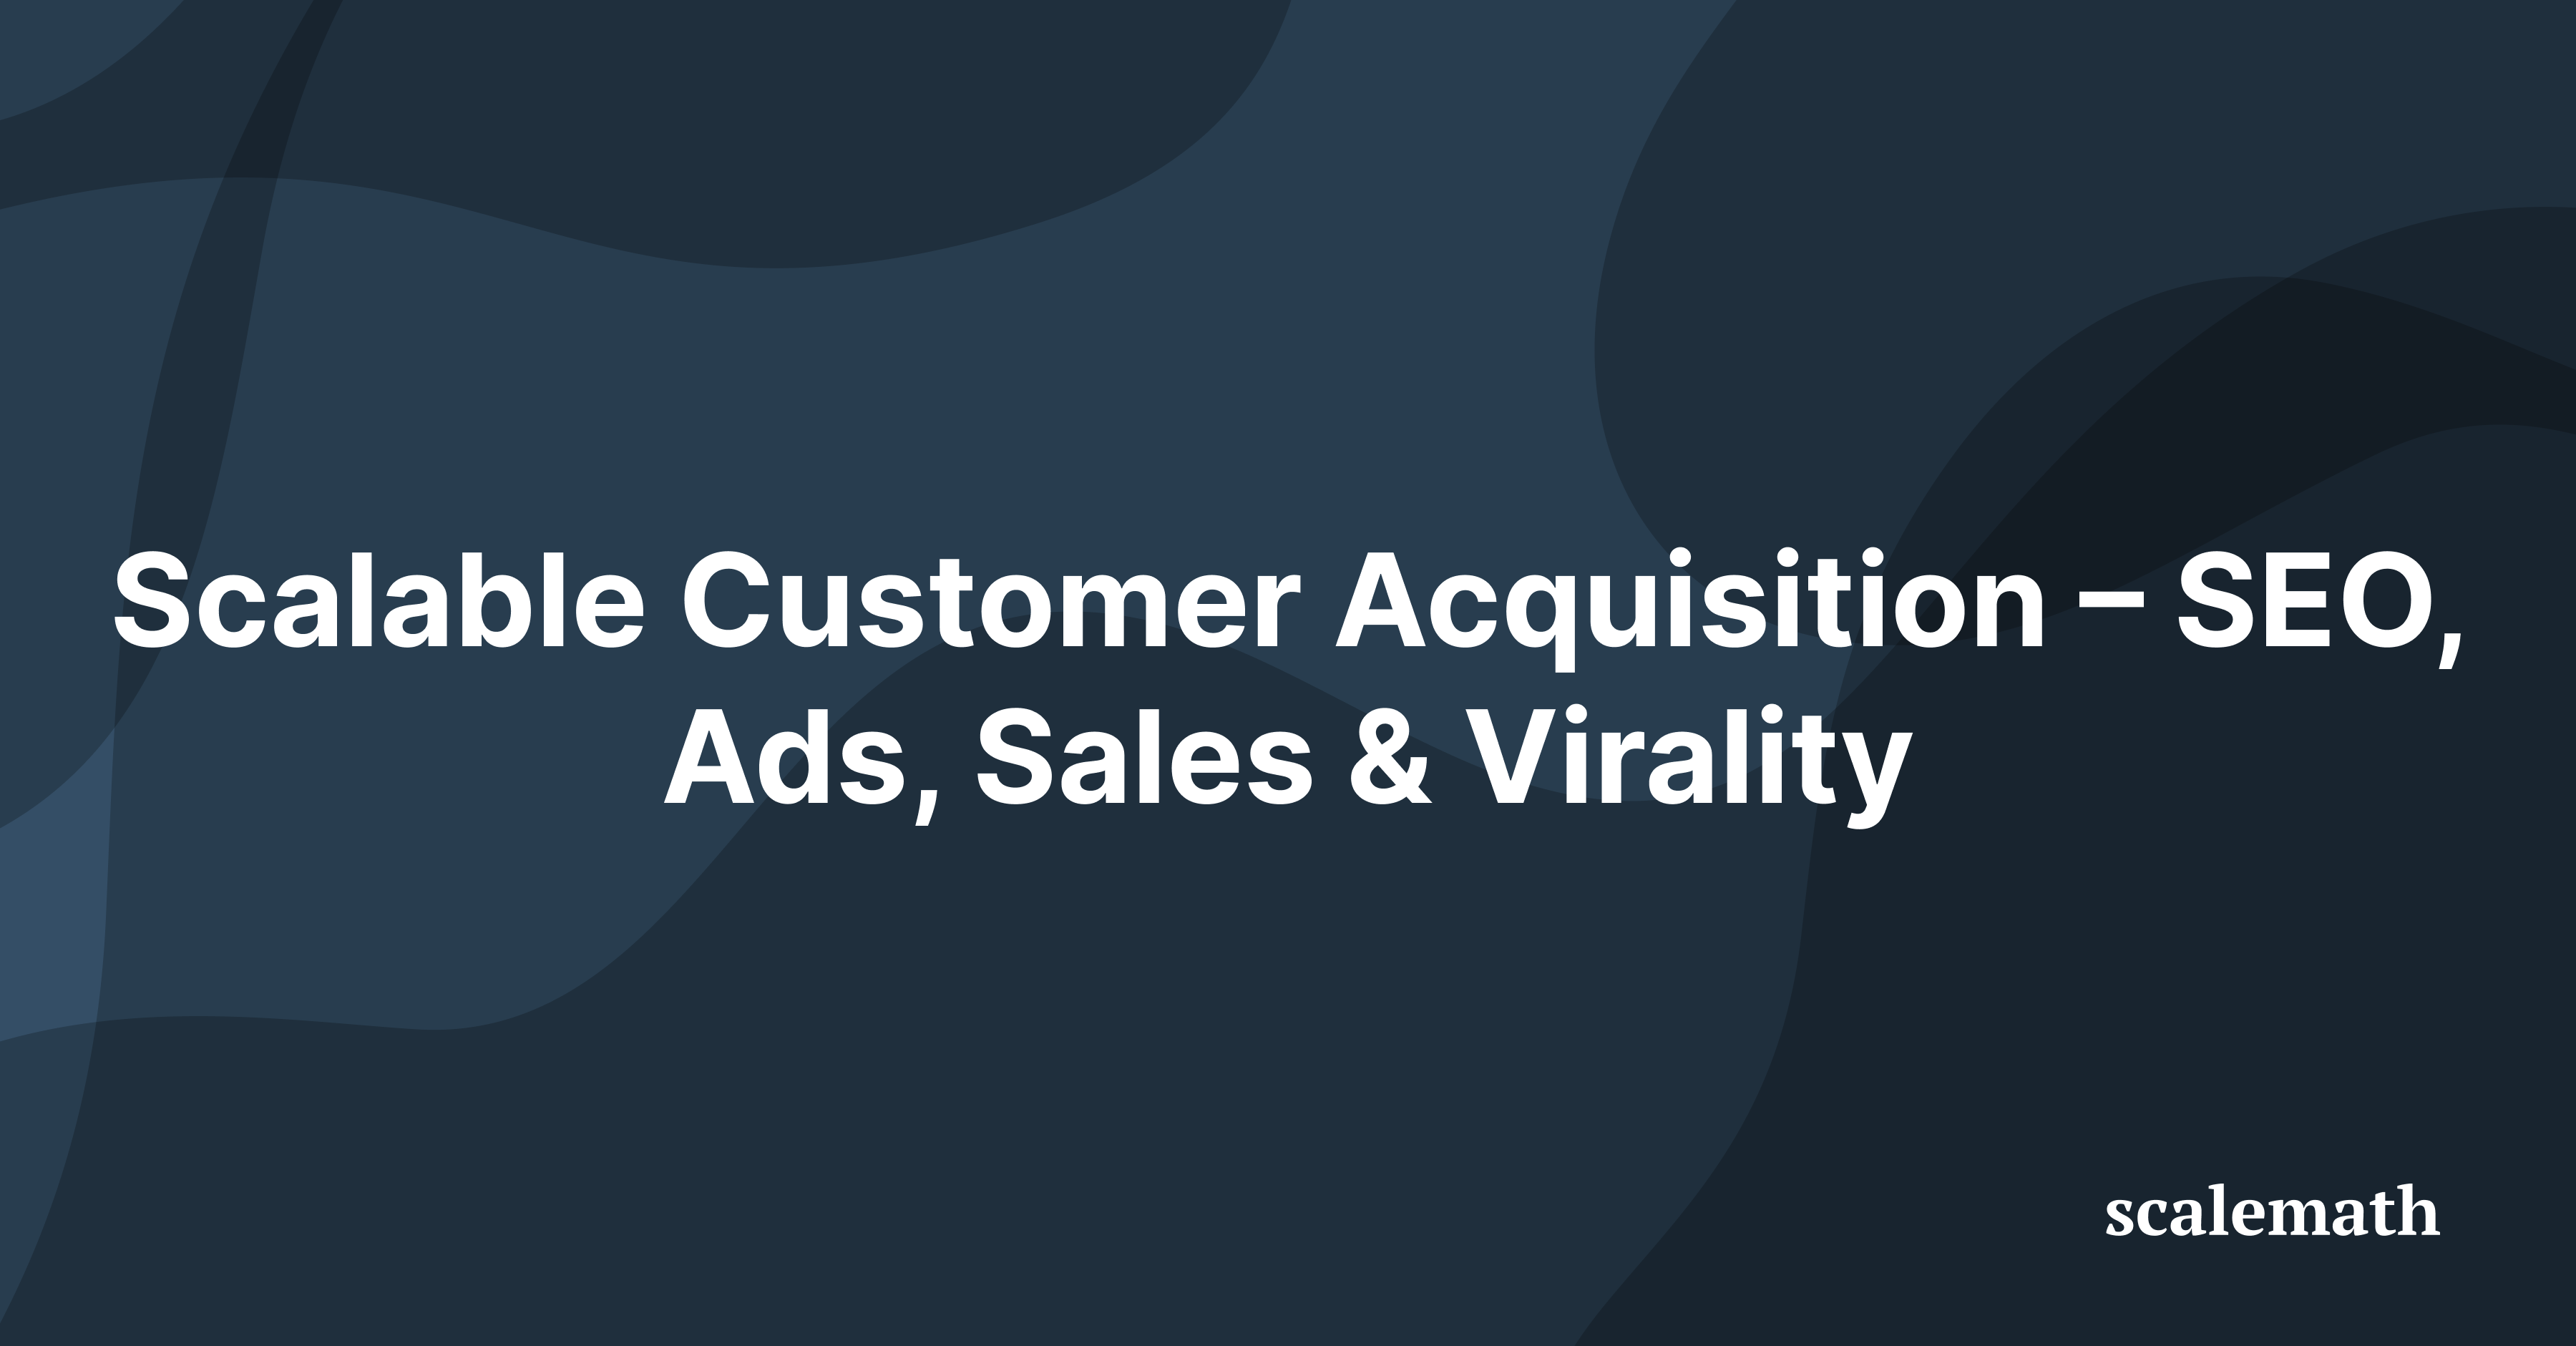 Scalable Customer Acquisition – SEO, Ads, Sales & Virality